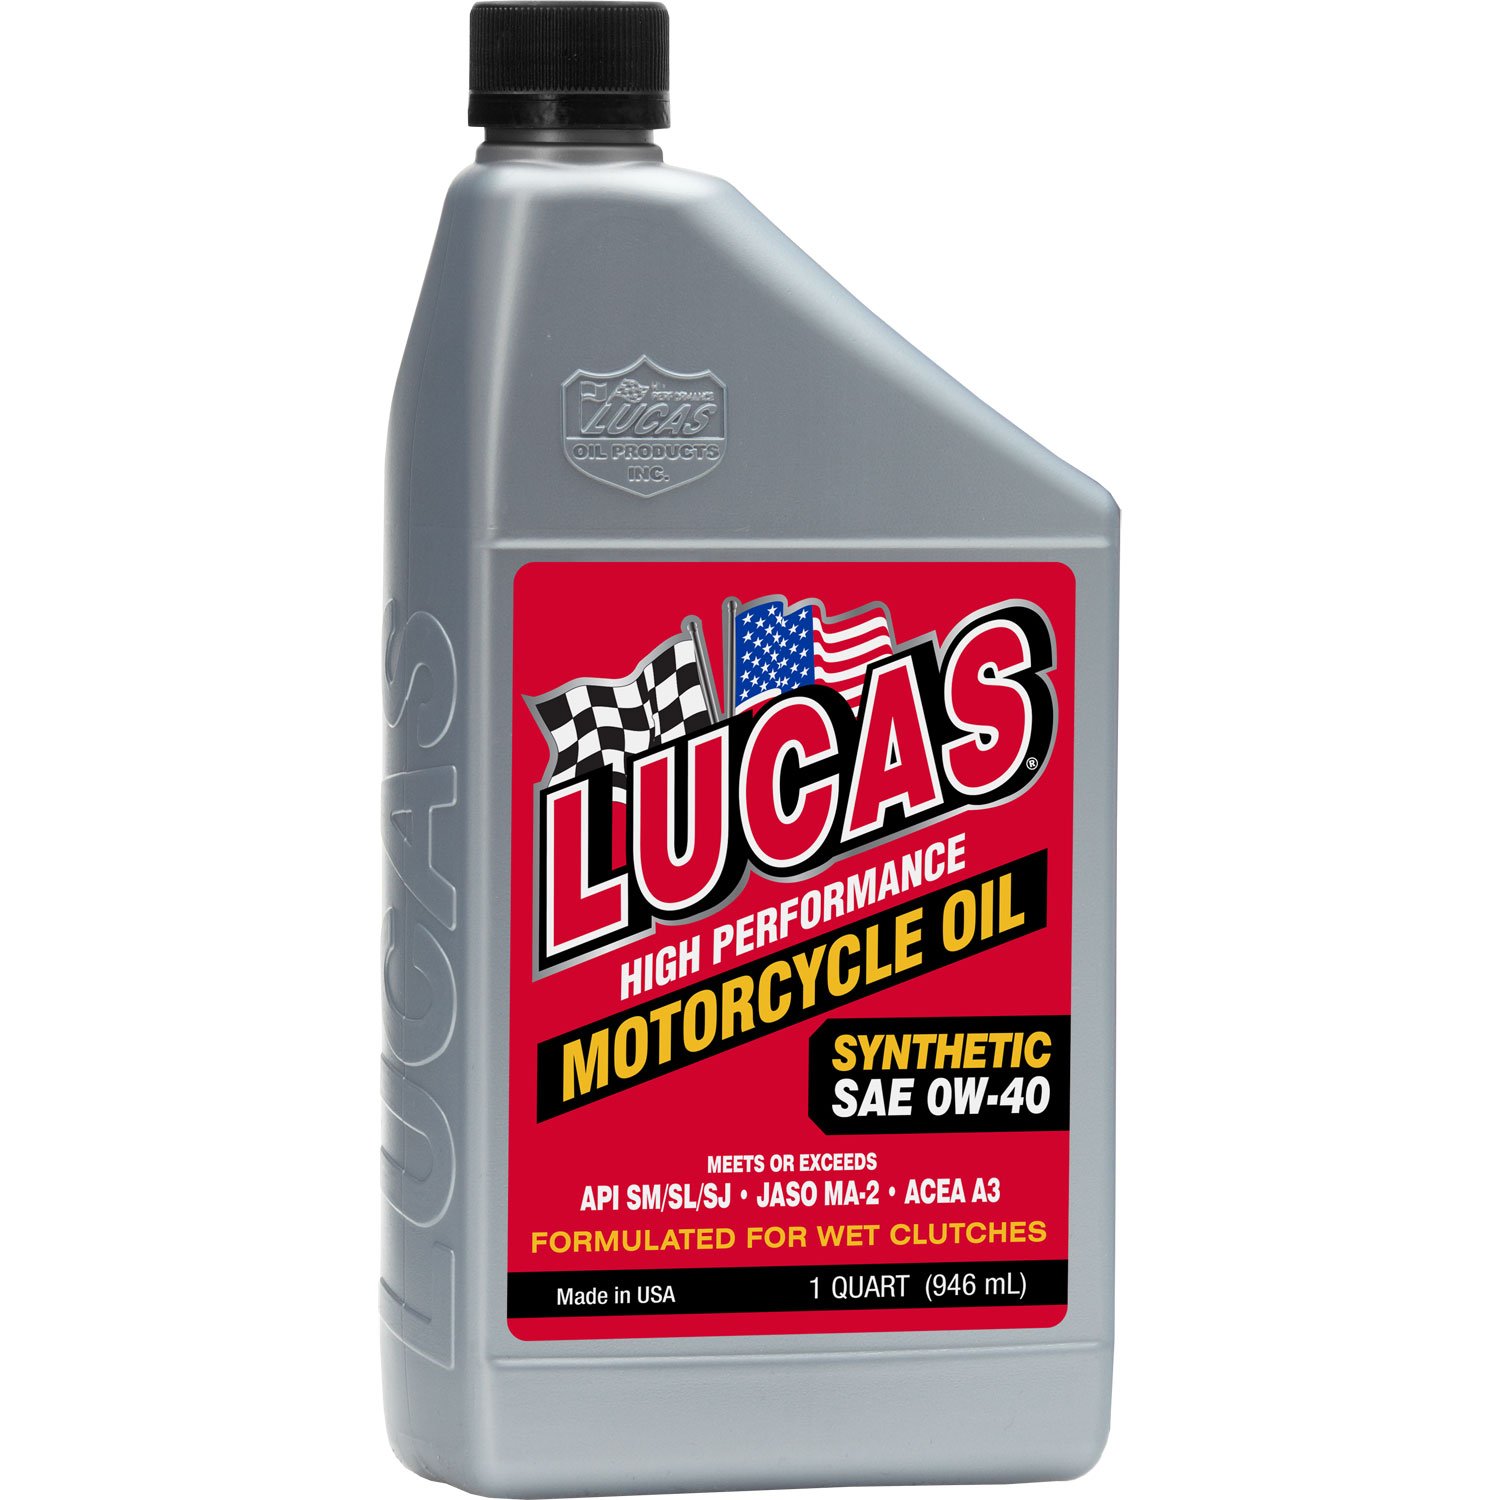 Synthetic SAE 0W-40 Motorcycle Oil 1-Quart